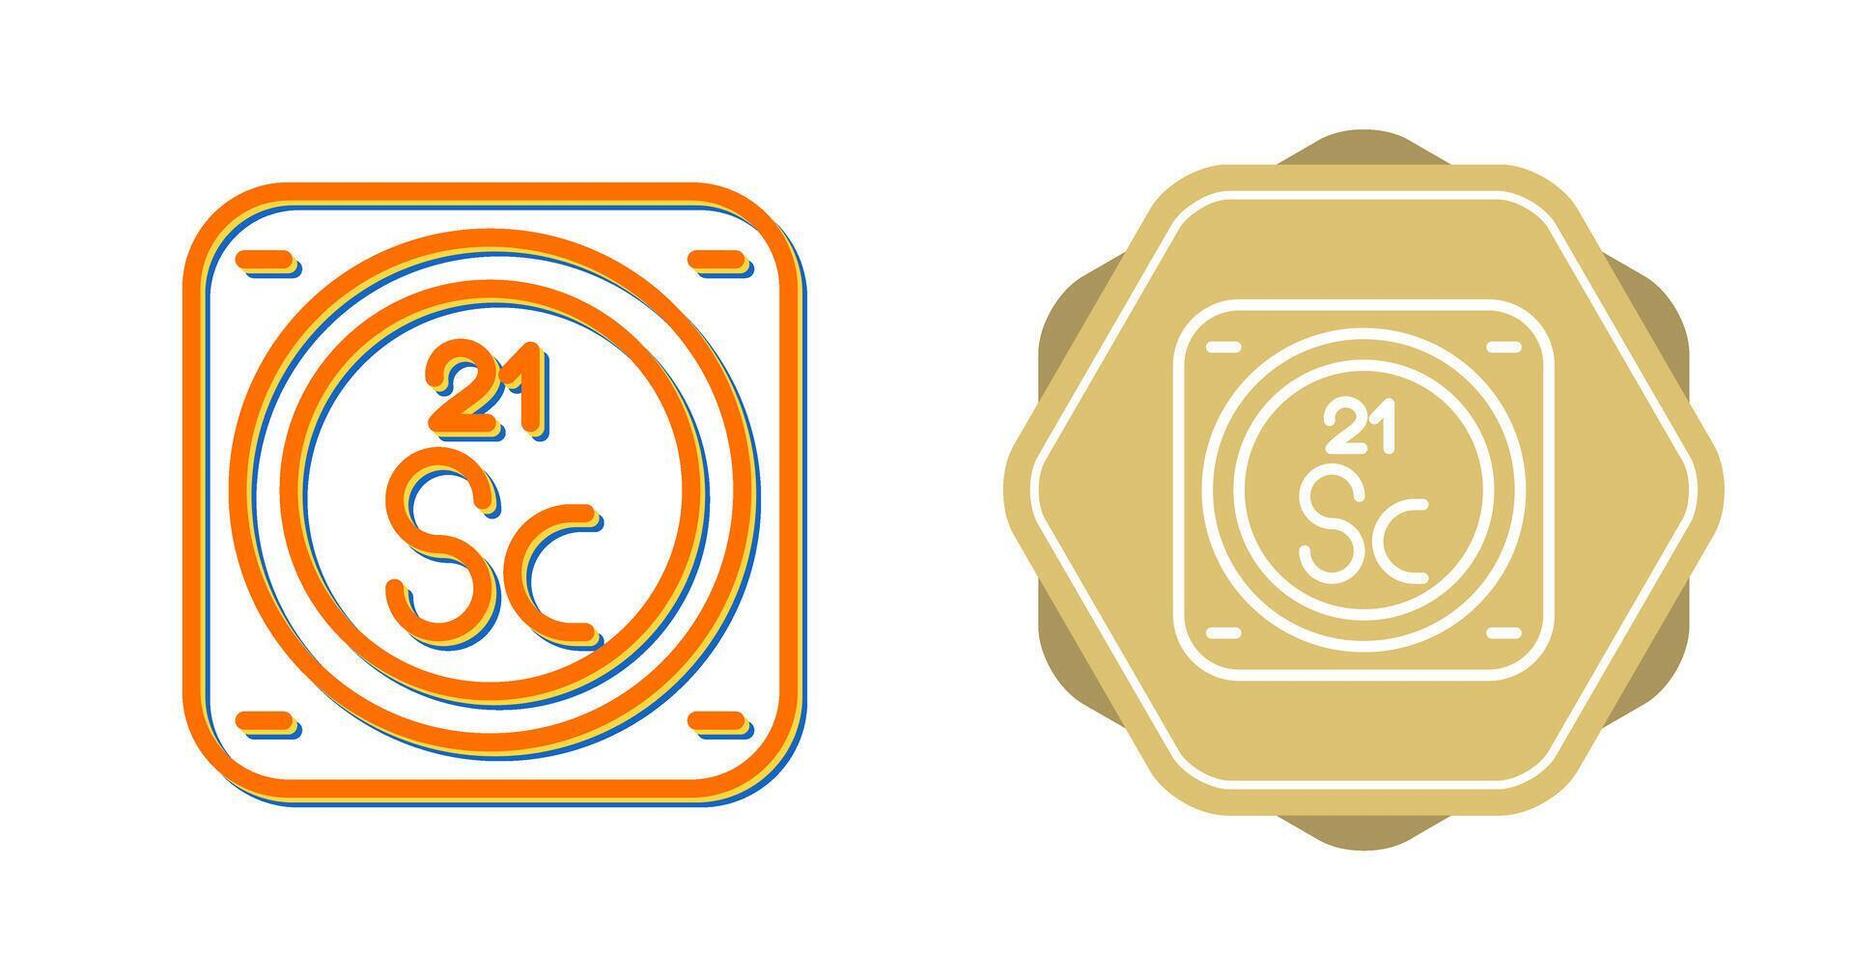 Chemical Element Vector Icon